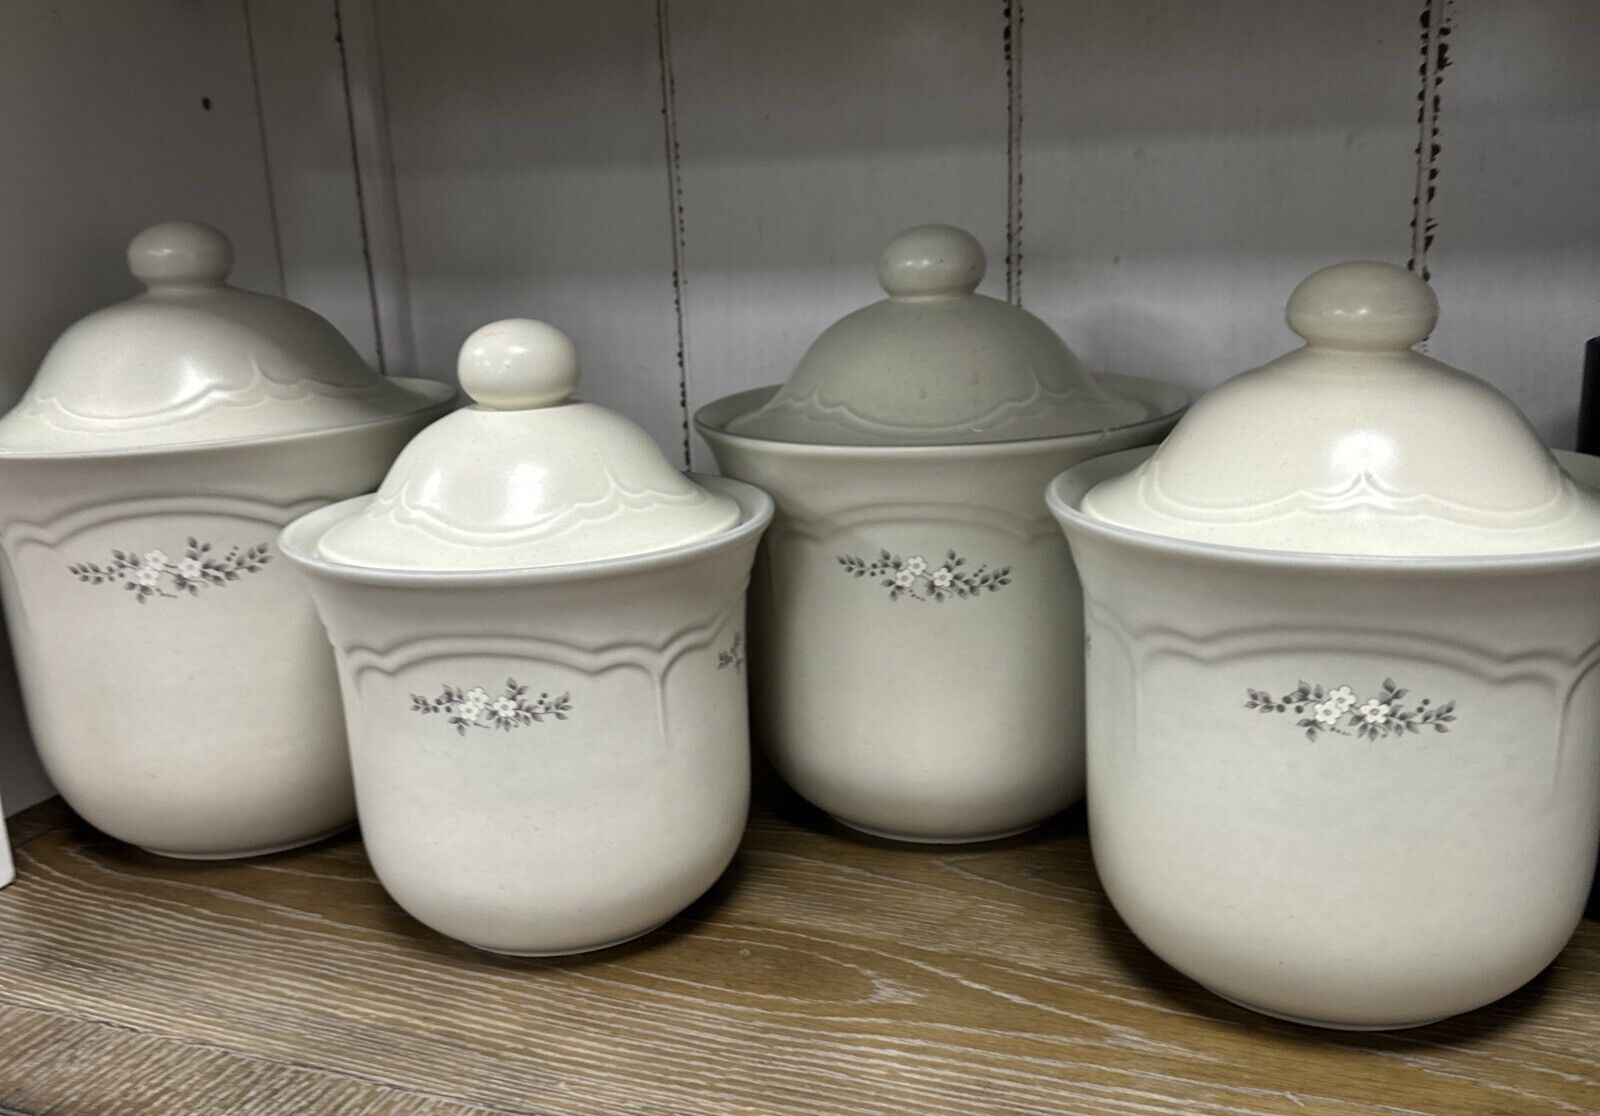 Pfaltzgraff HEIRLOOM 4 Piece Stoneware Canister Set with Lids 3, 2.5, 2, 1.5 Qts